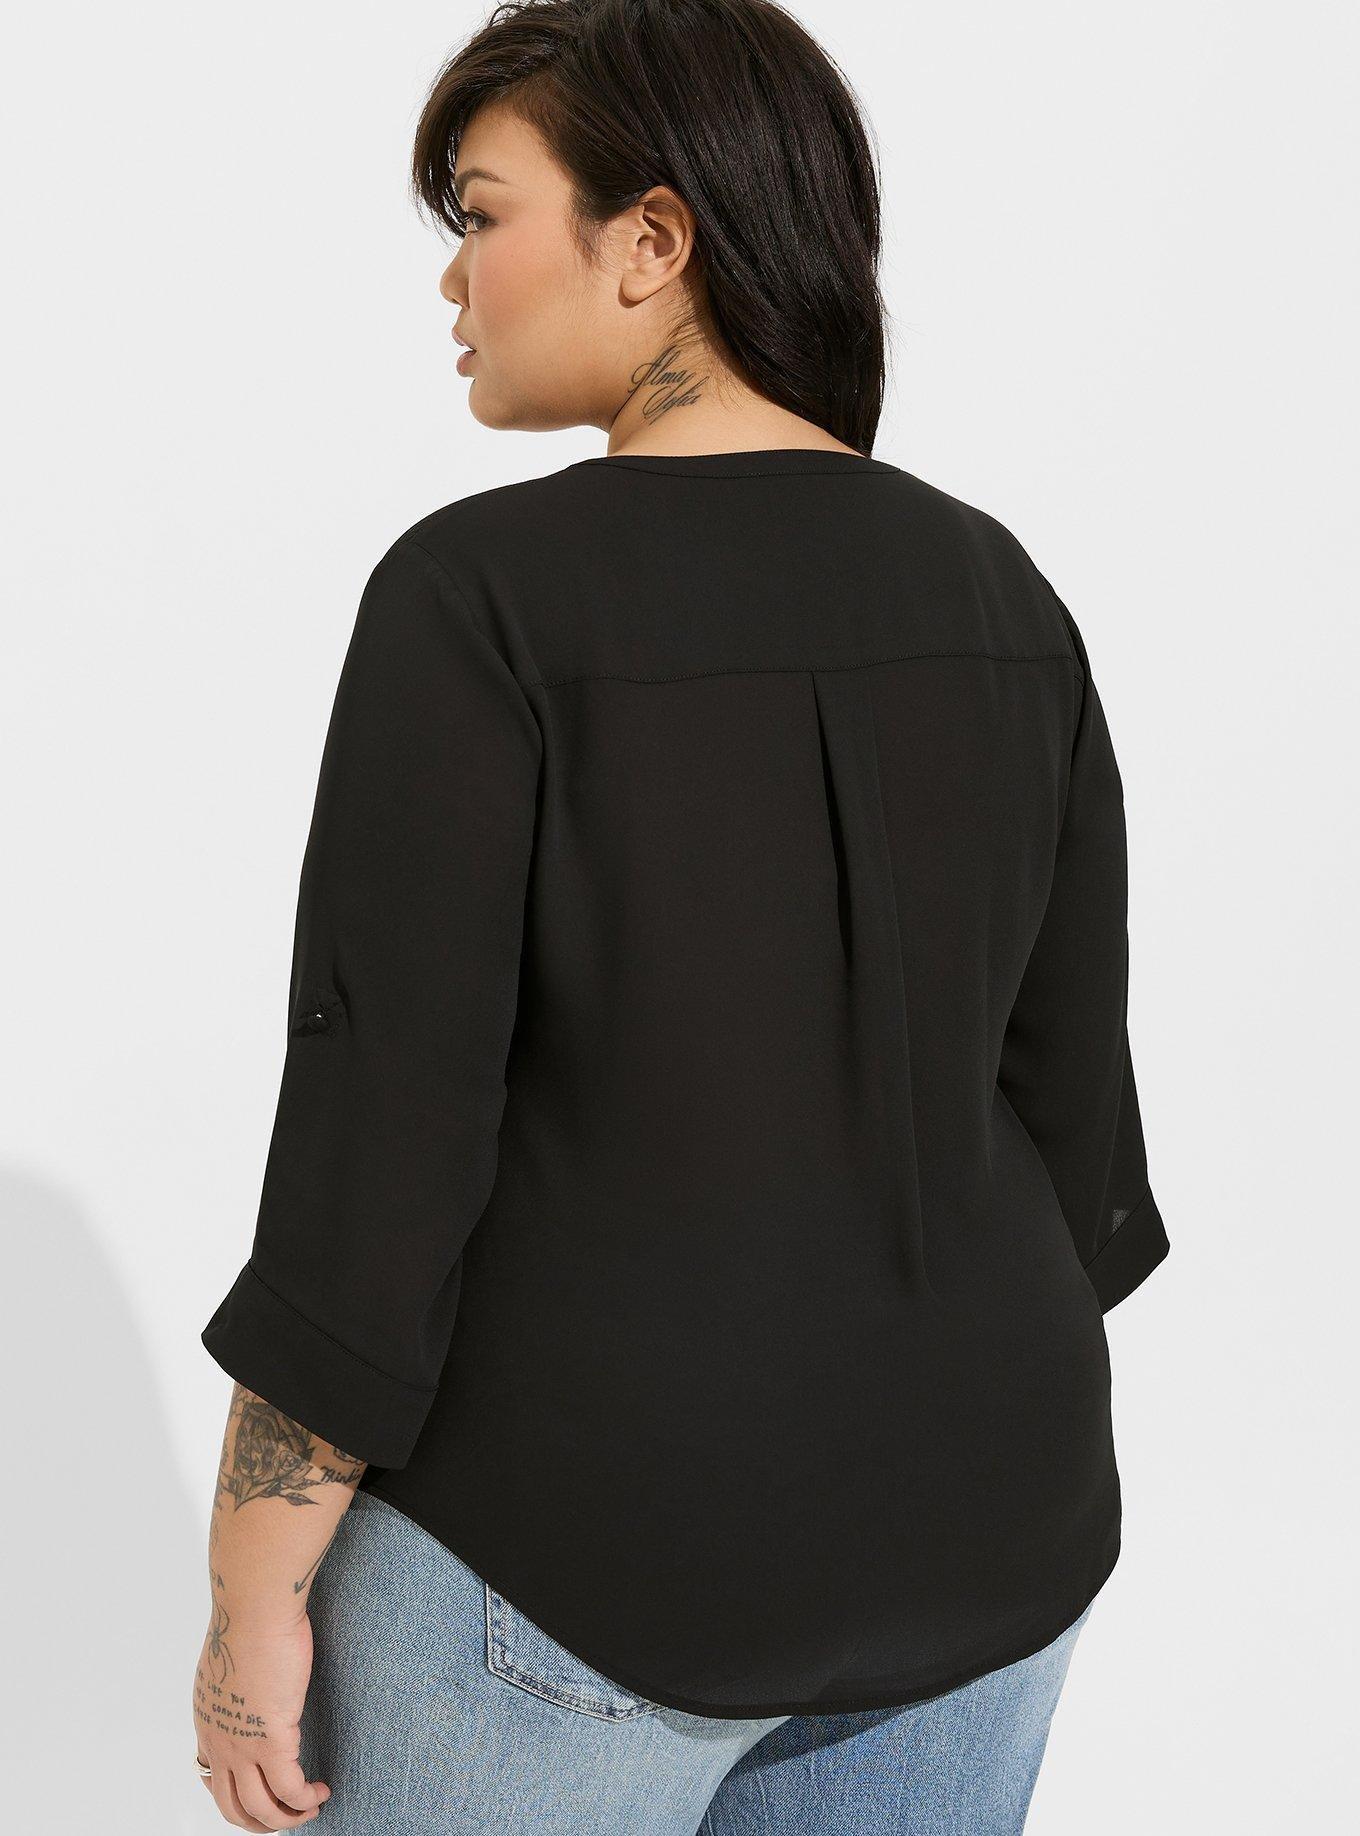 Torrid 4X New Sexy Red Lips Georgette Cold Shoulder India